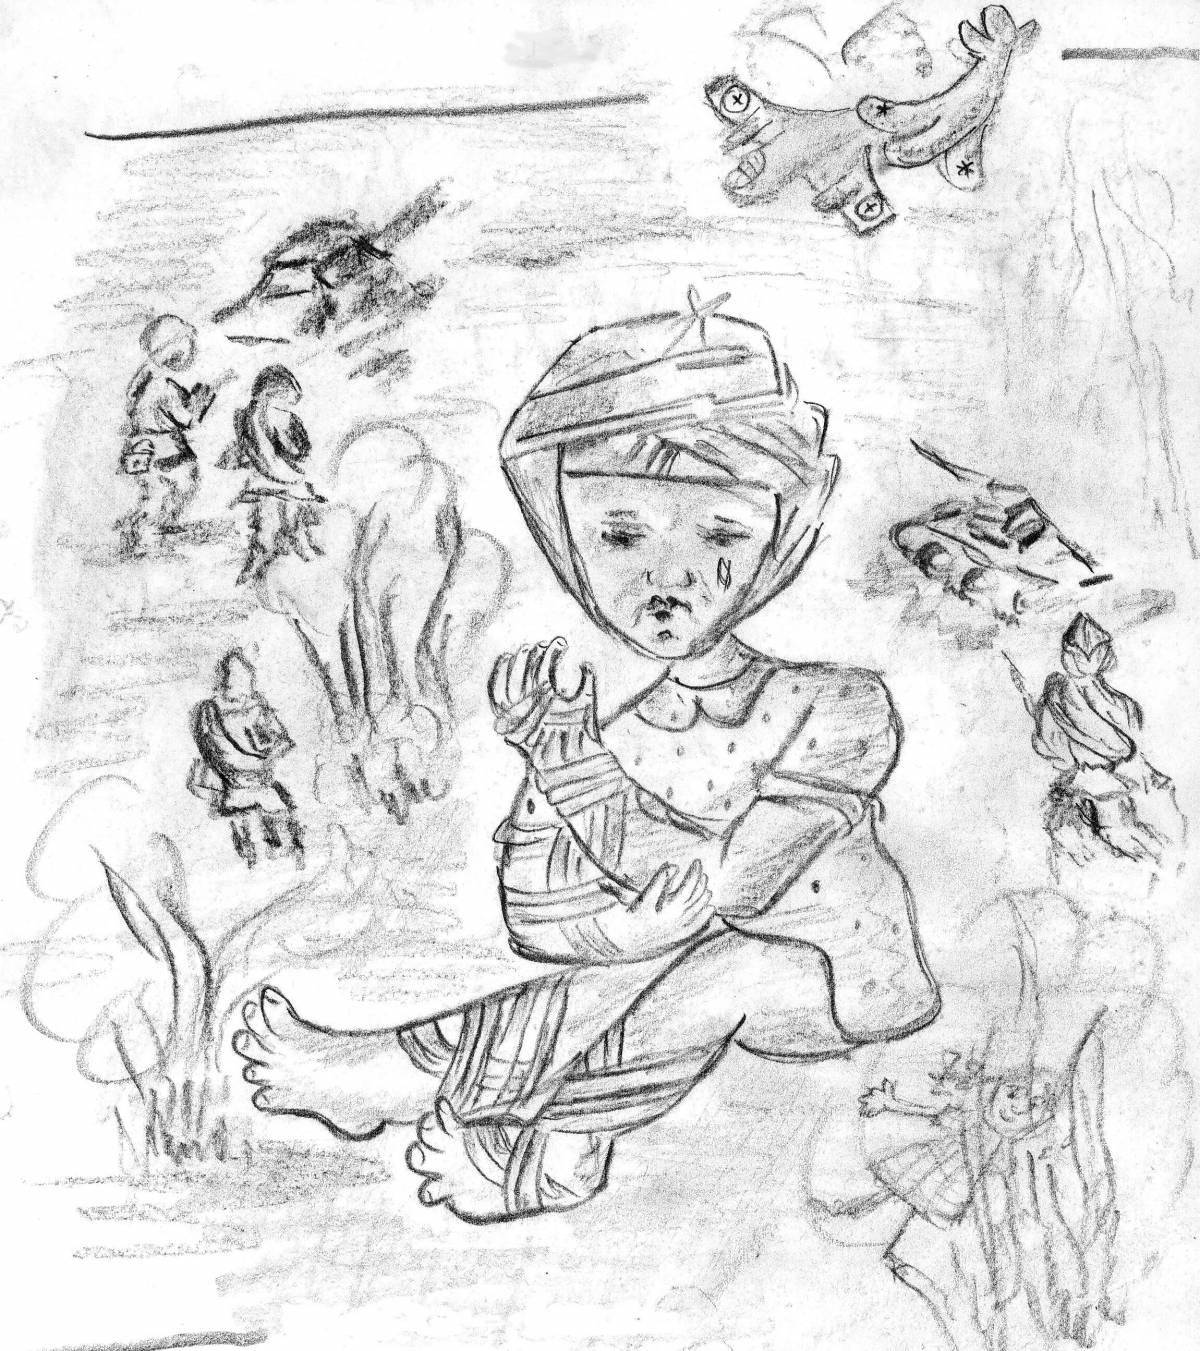 Playful children's military drawing